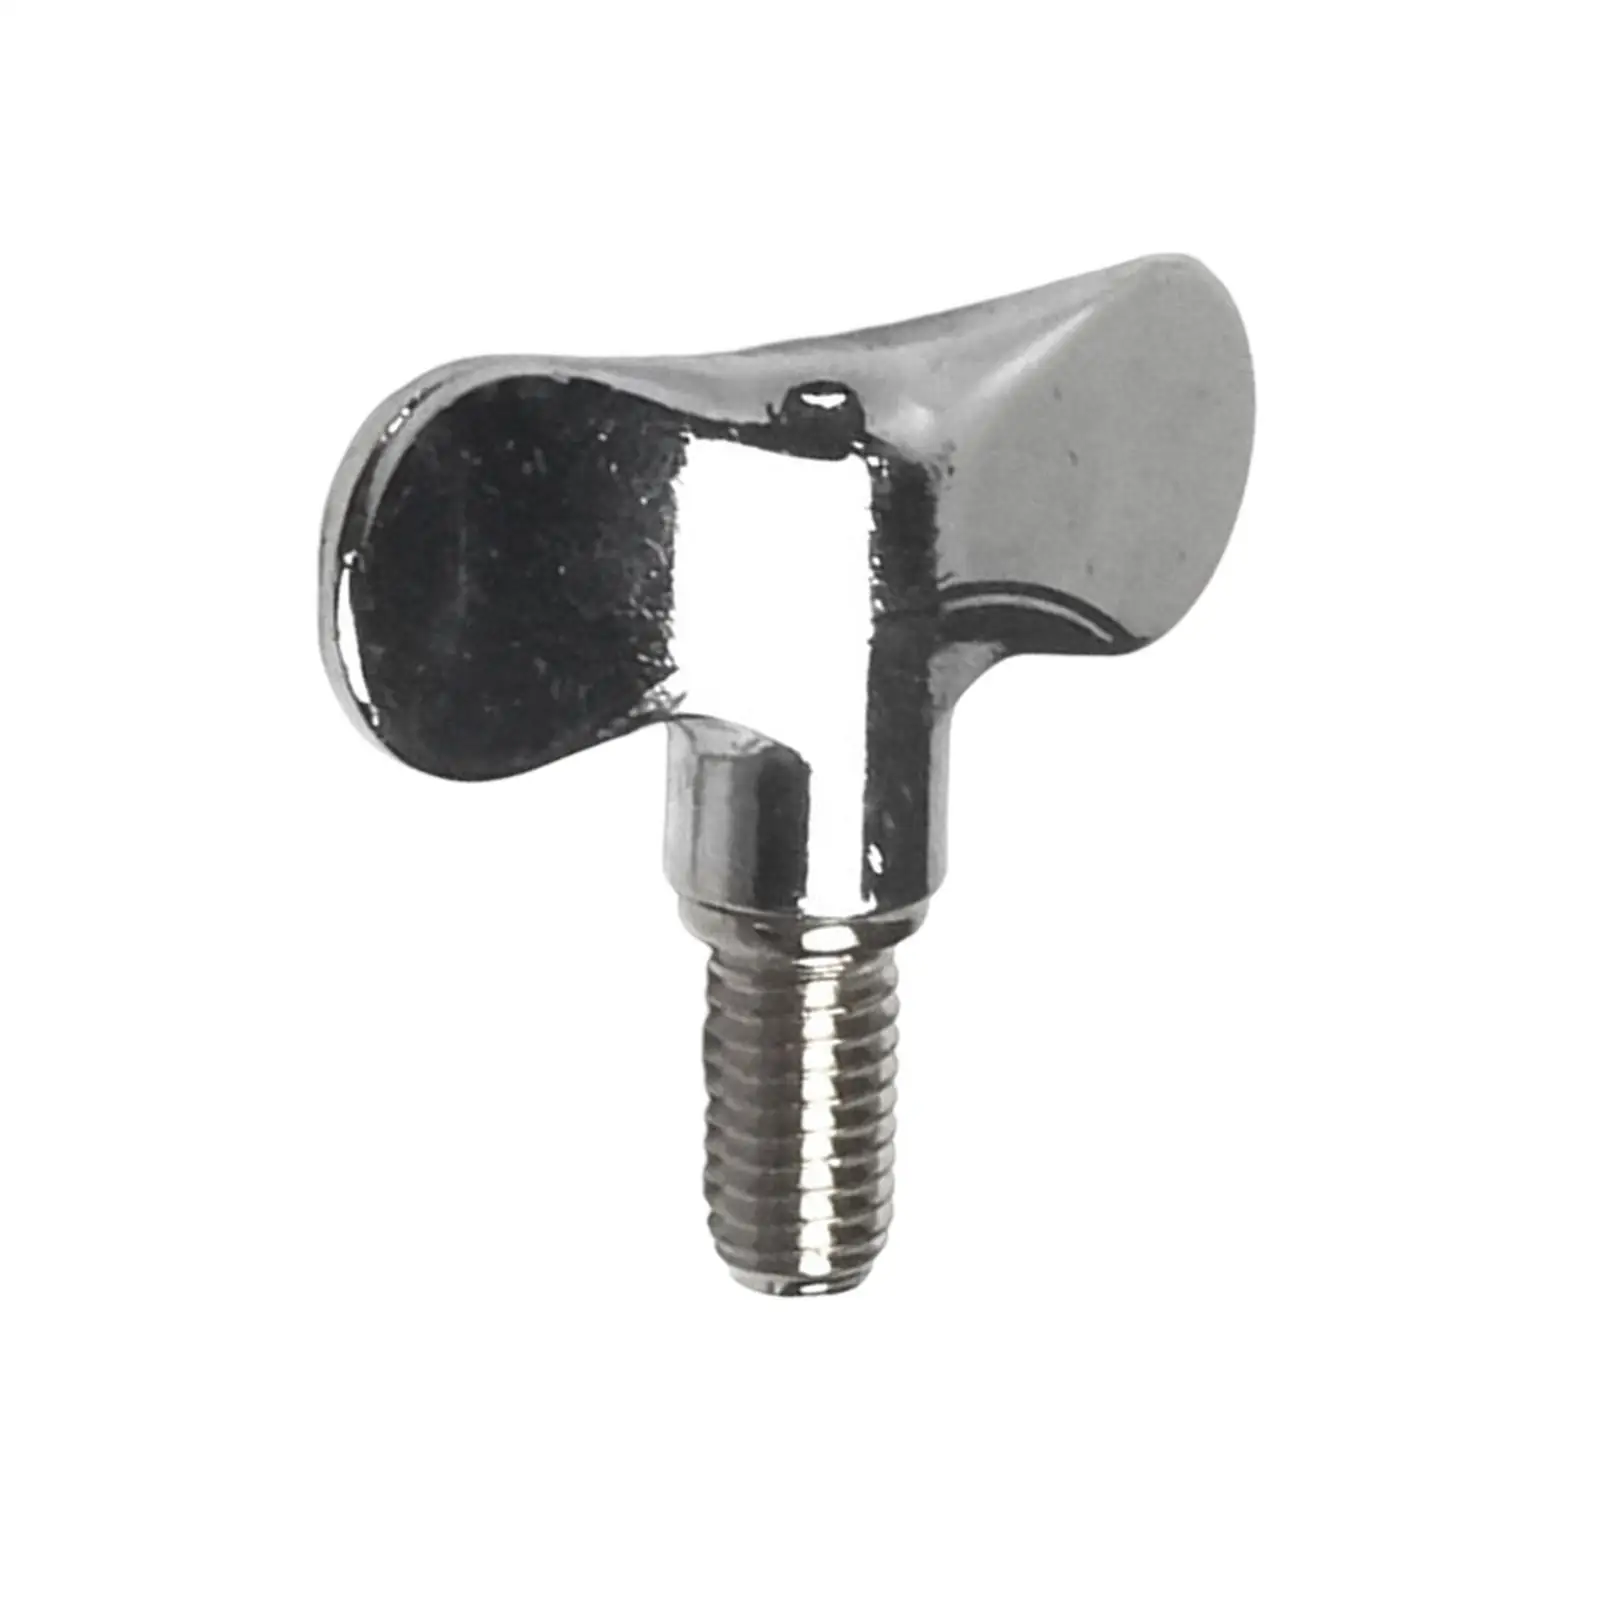 Drum Cymbal Stand Wing Nuts, Quick Release for Drummer Metal Brackets Durable Adjustable M6 Nut Screw Accessories